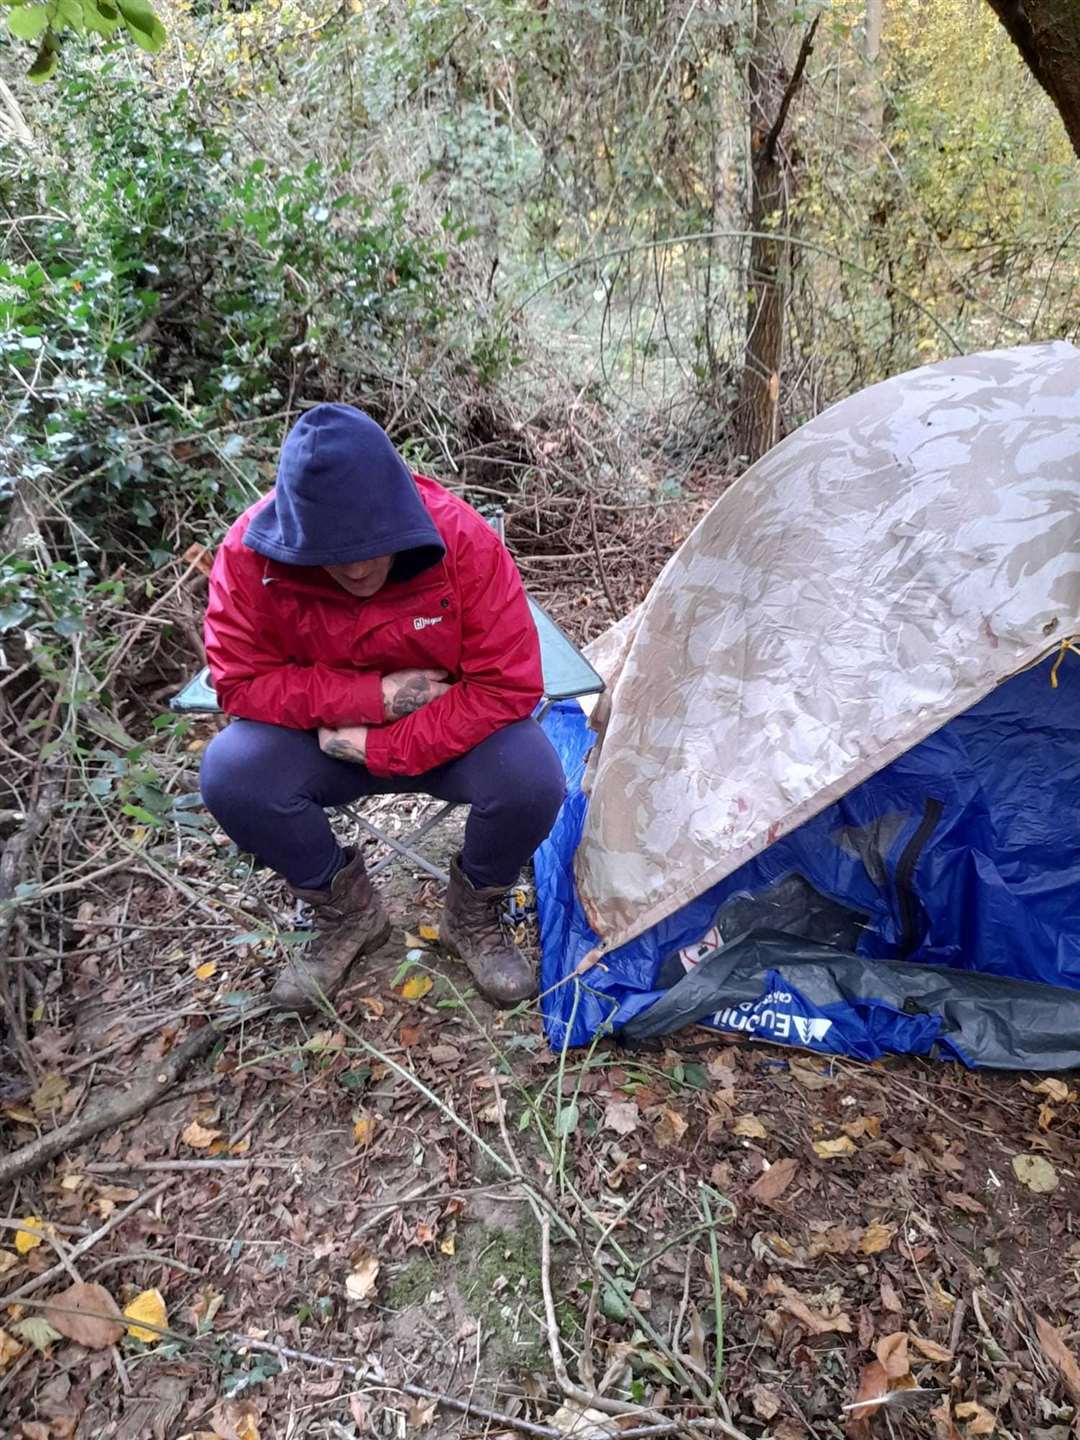 Neil is facing a winter of fear and loneliness after the attack on his tent